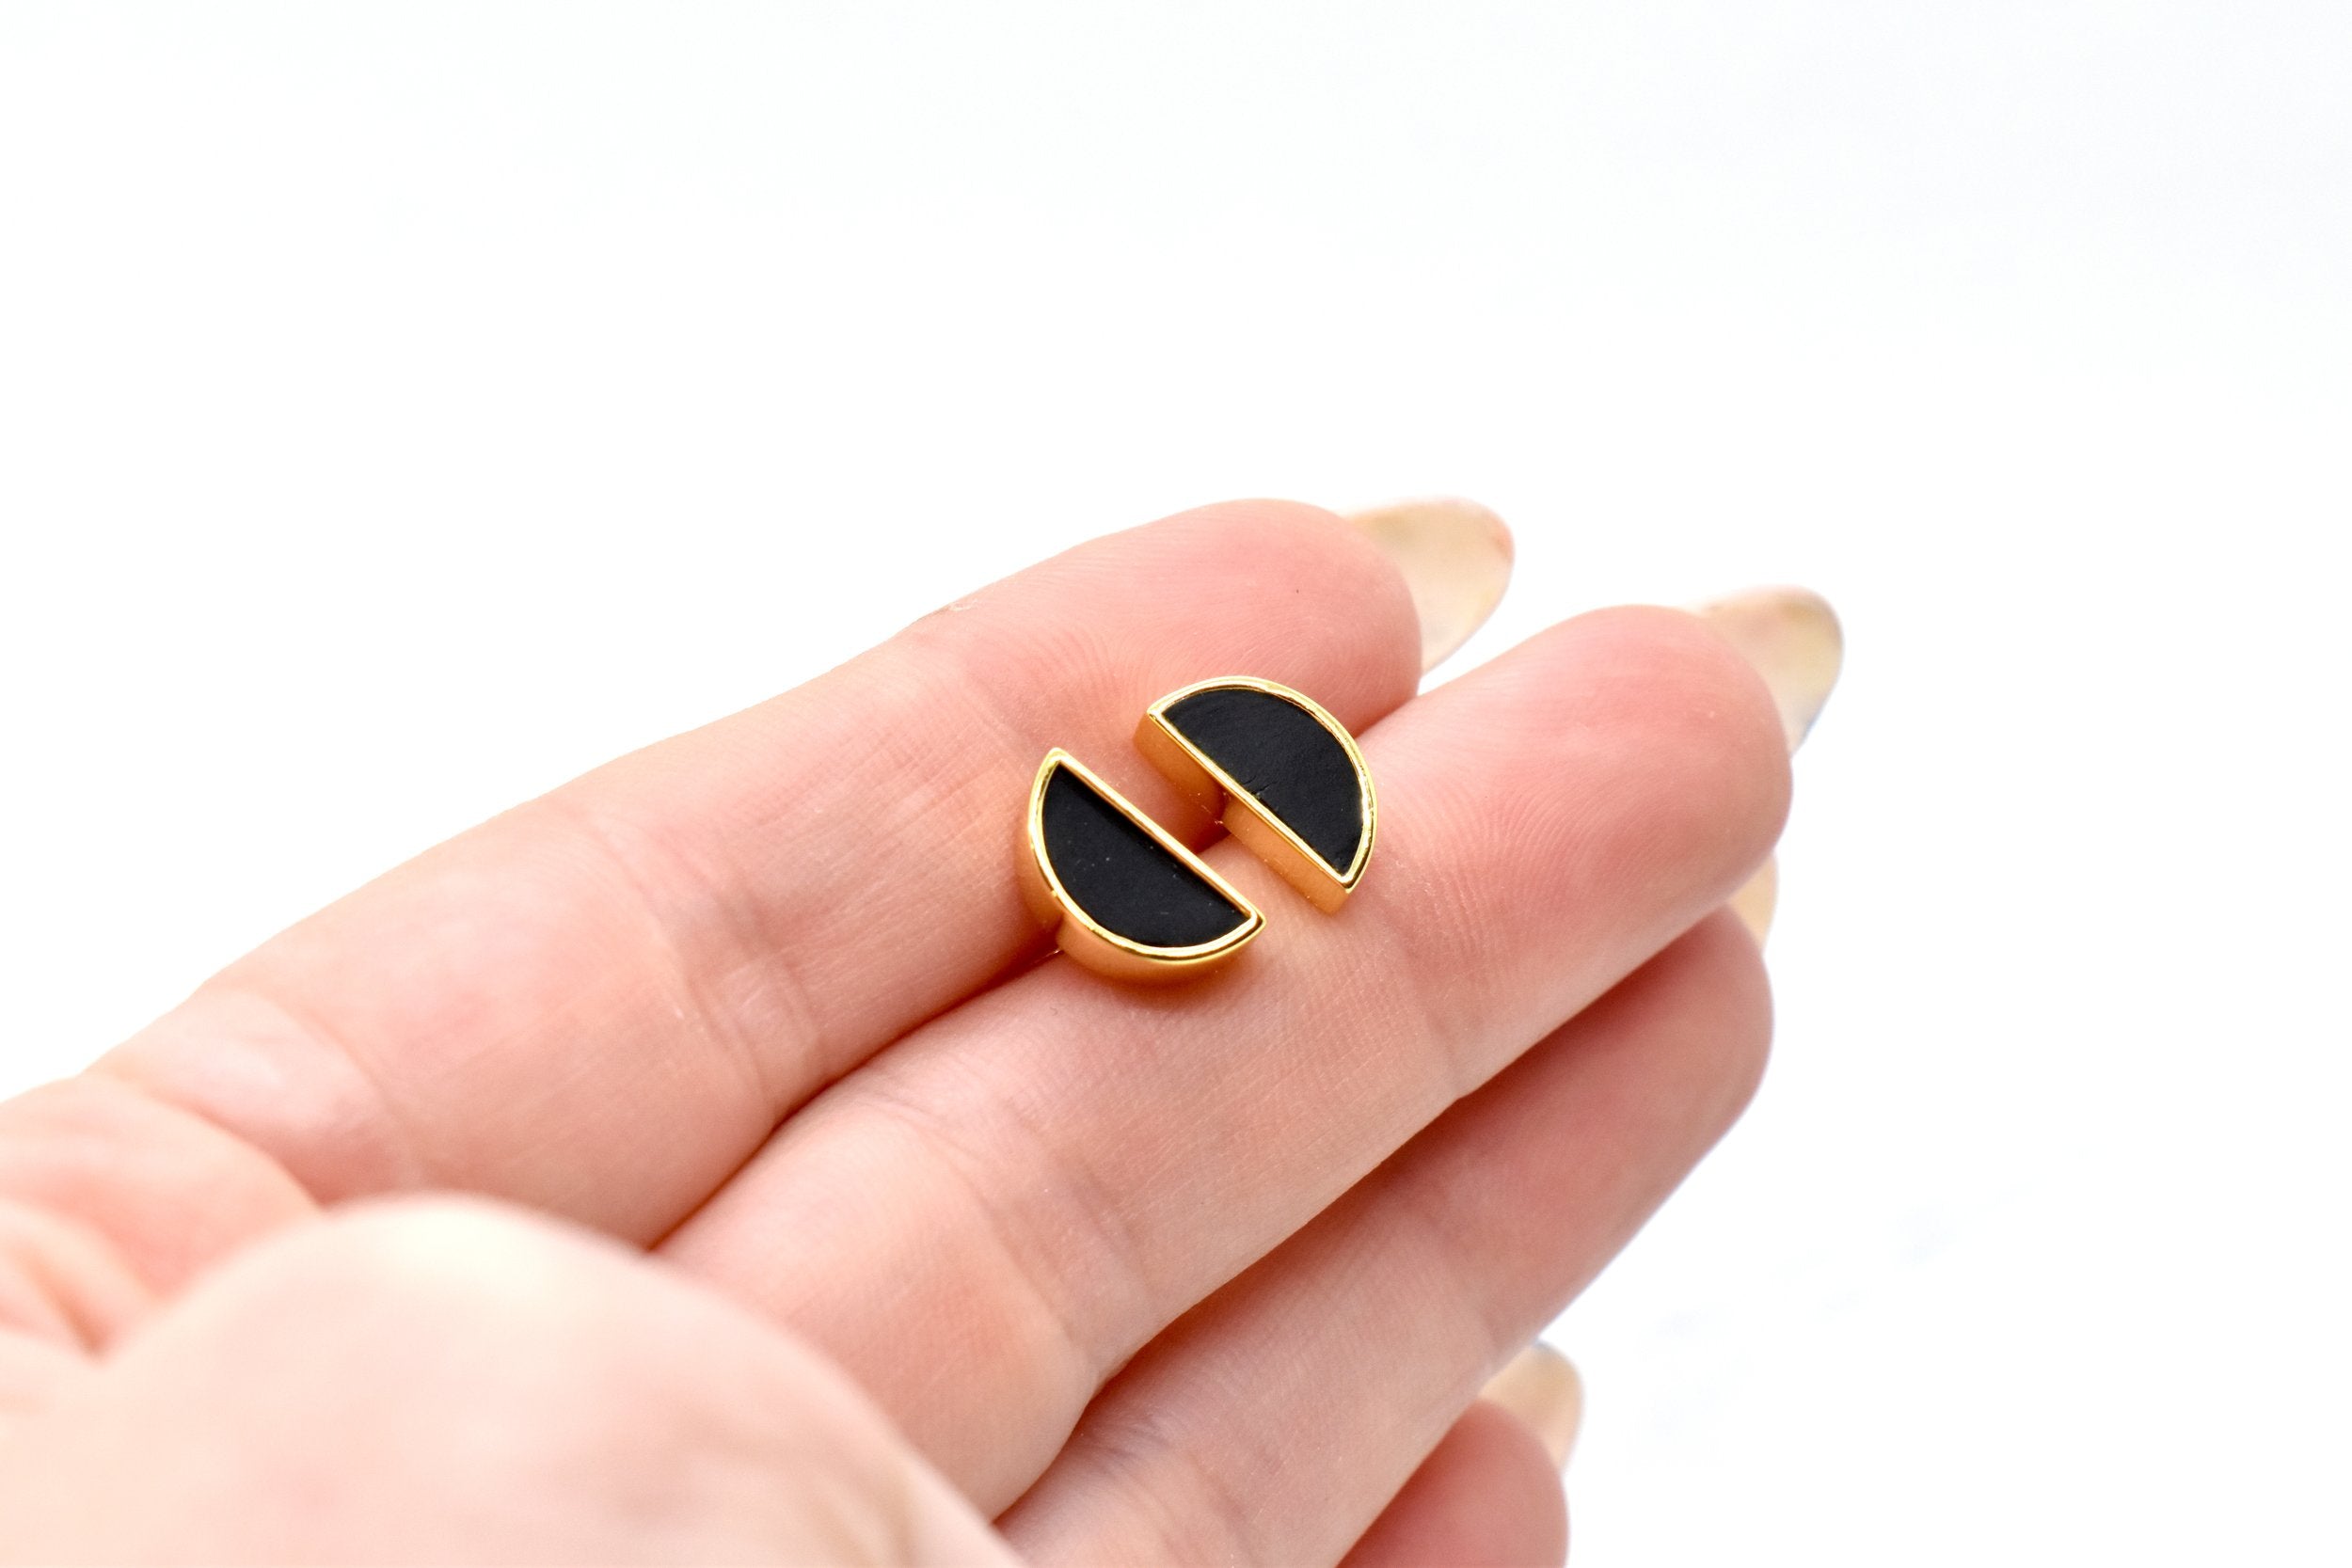 hand holding a pair of half circle stud earrings in gold and black with hypoallergenic 14k gold plated sterling silver posts